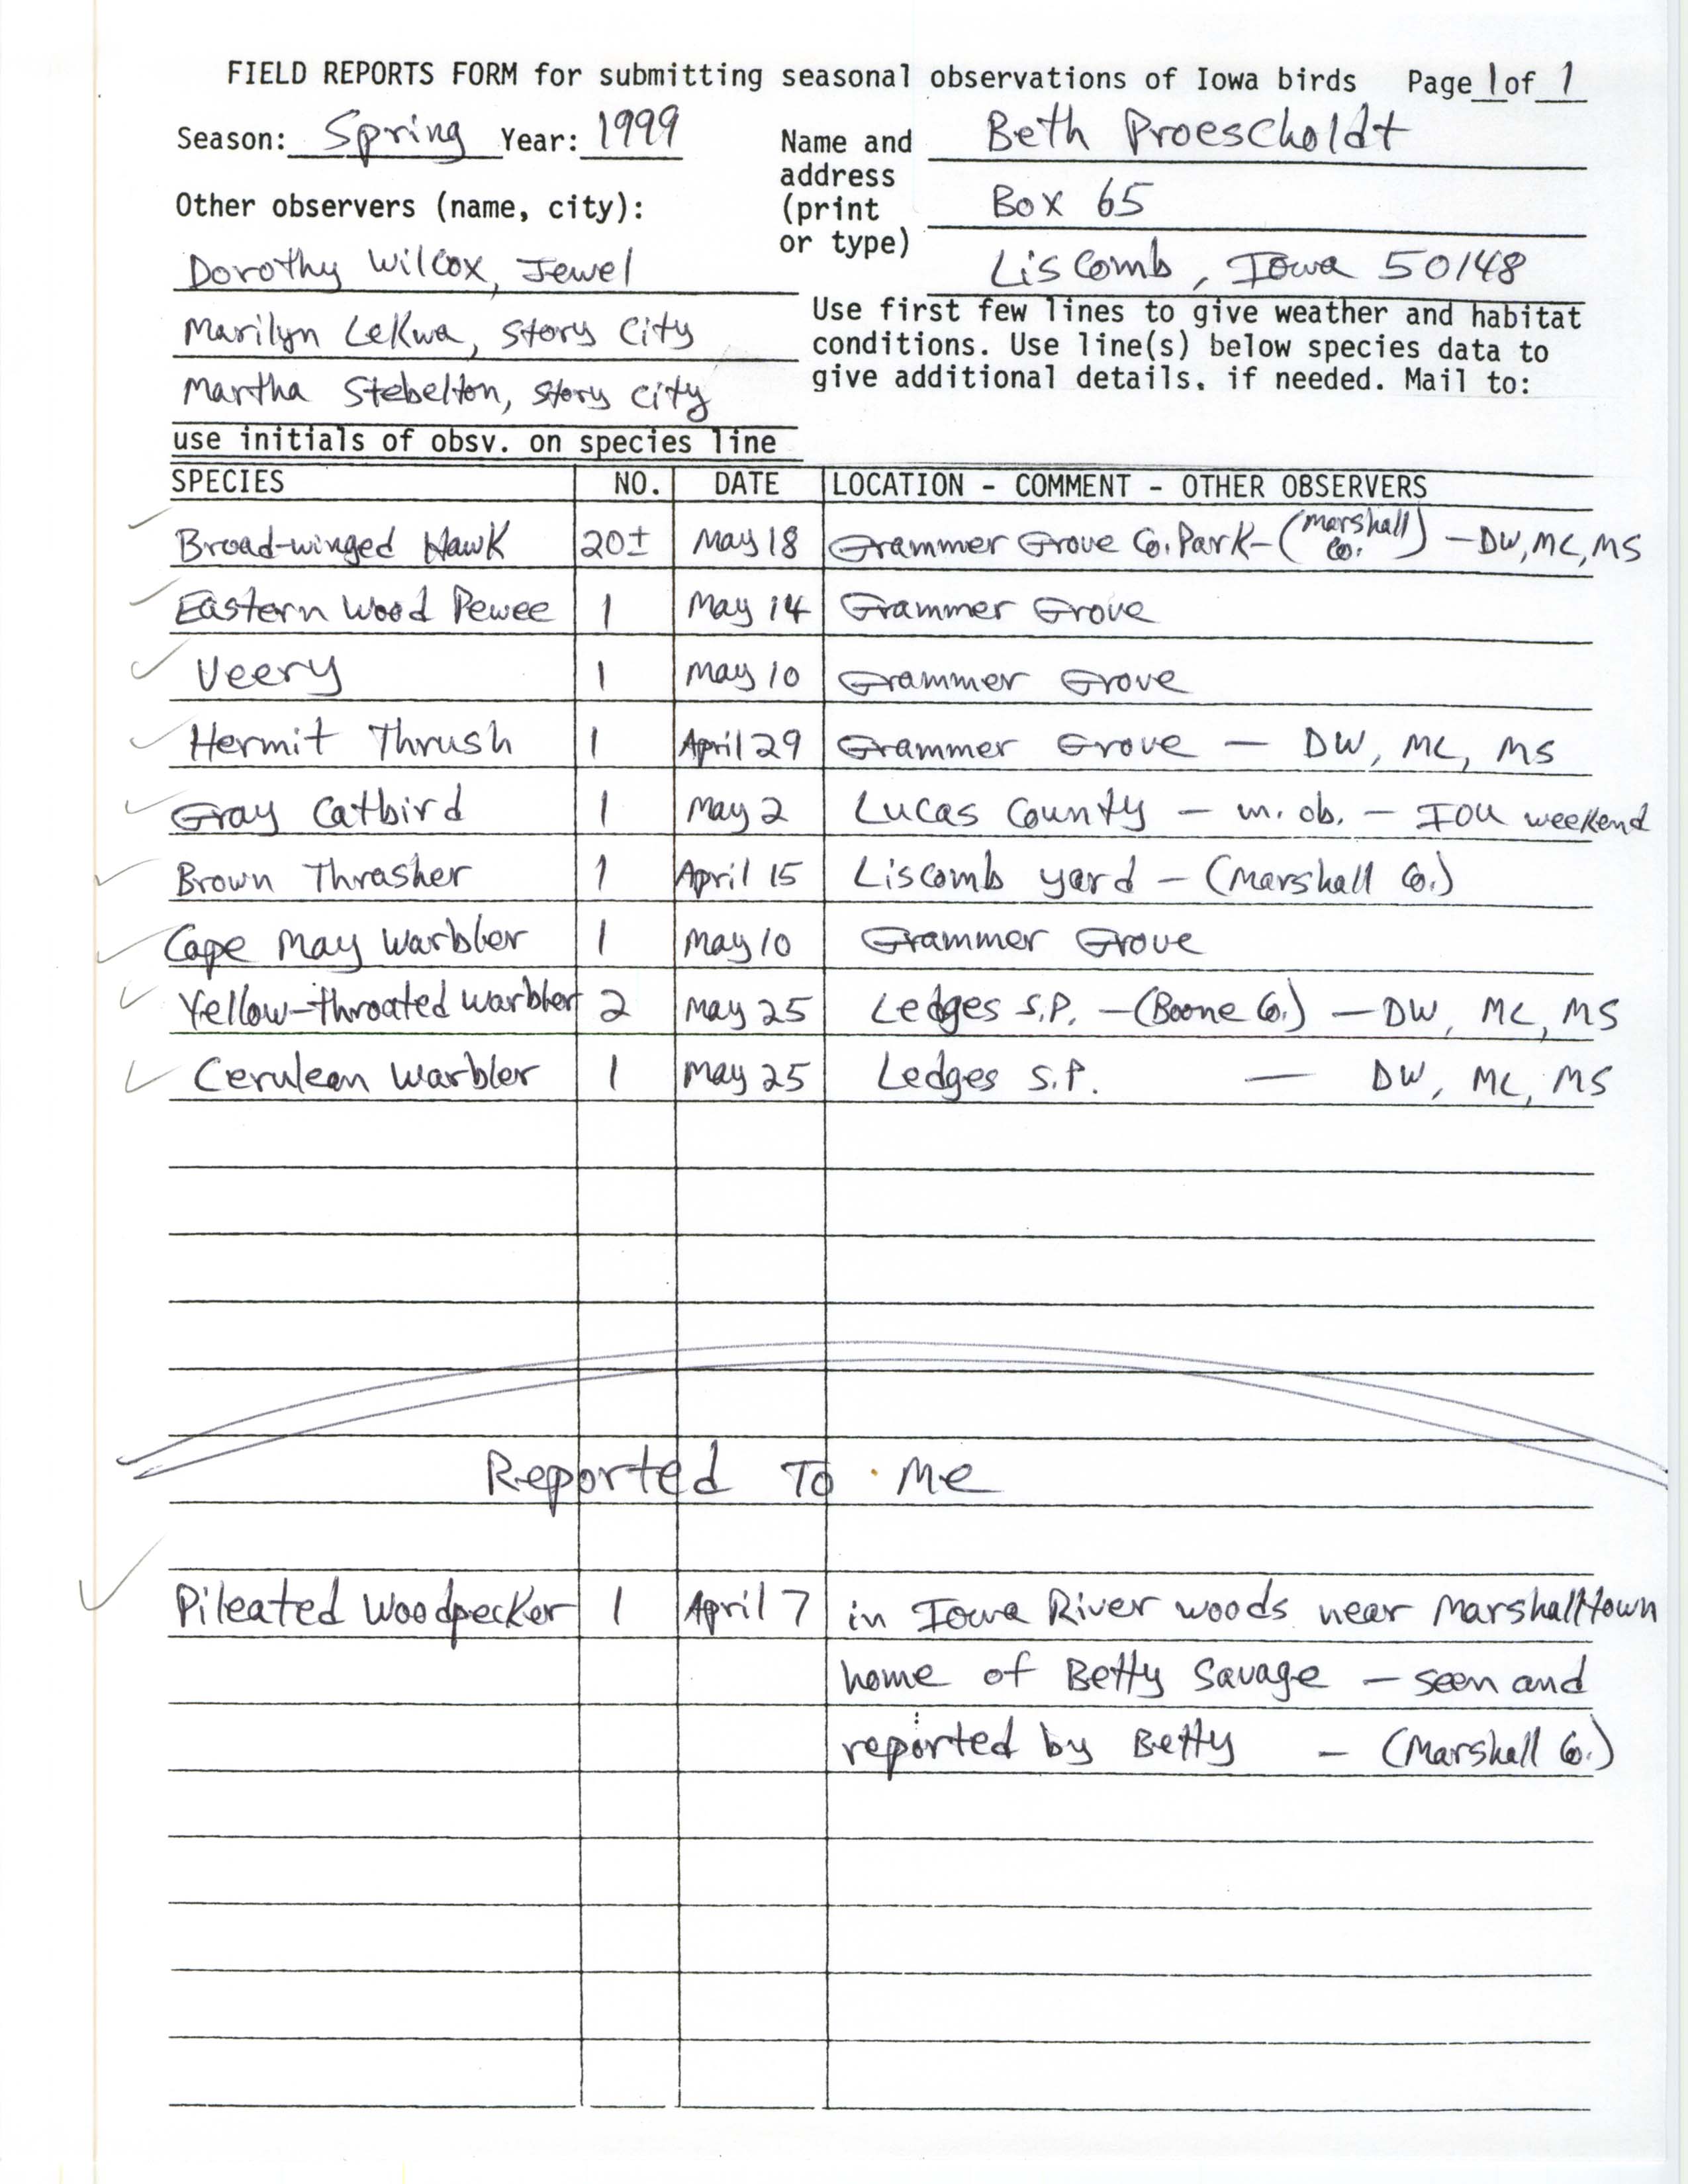 Field reports form for submitting seasonal observations of Iowa birds, Beth Proescholdt, spring 1999